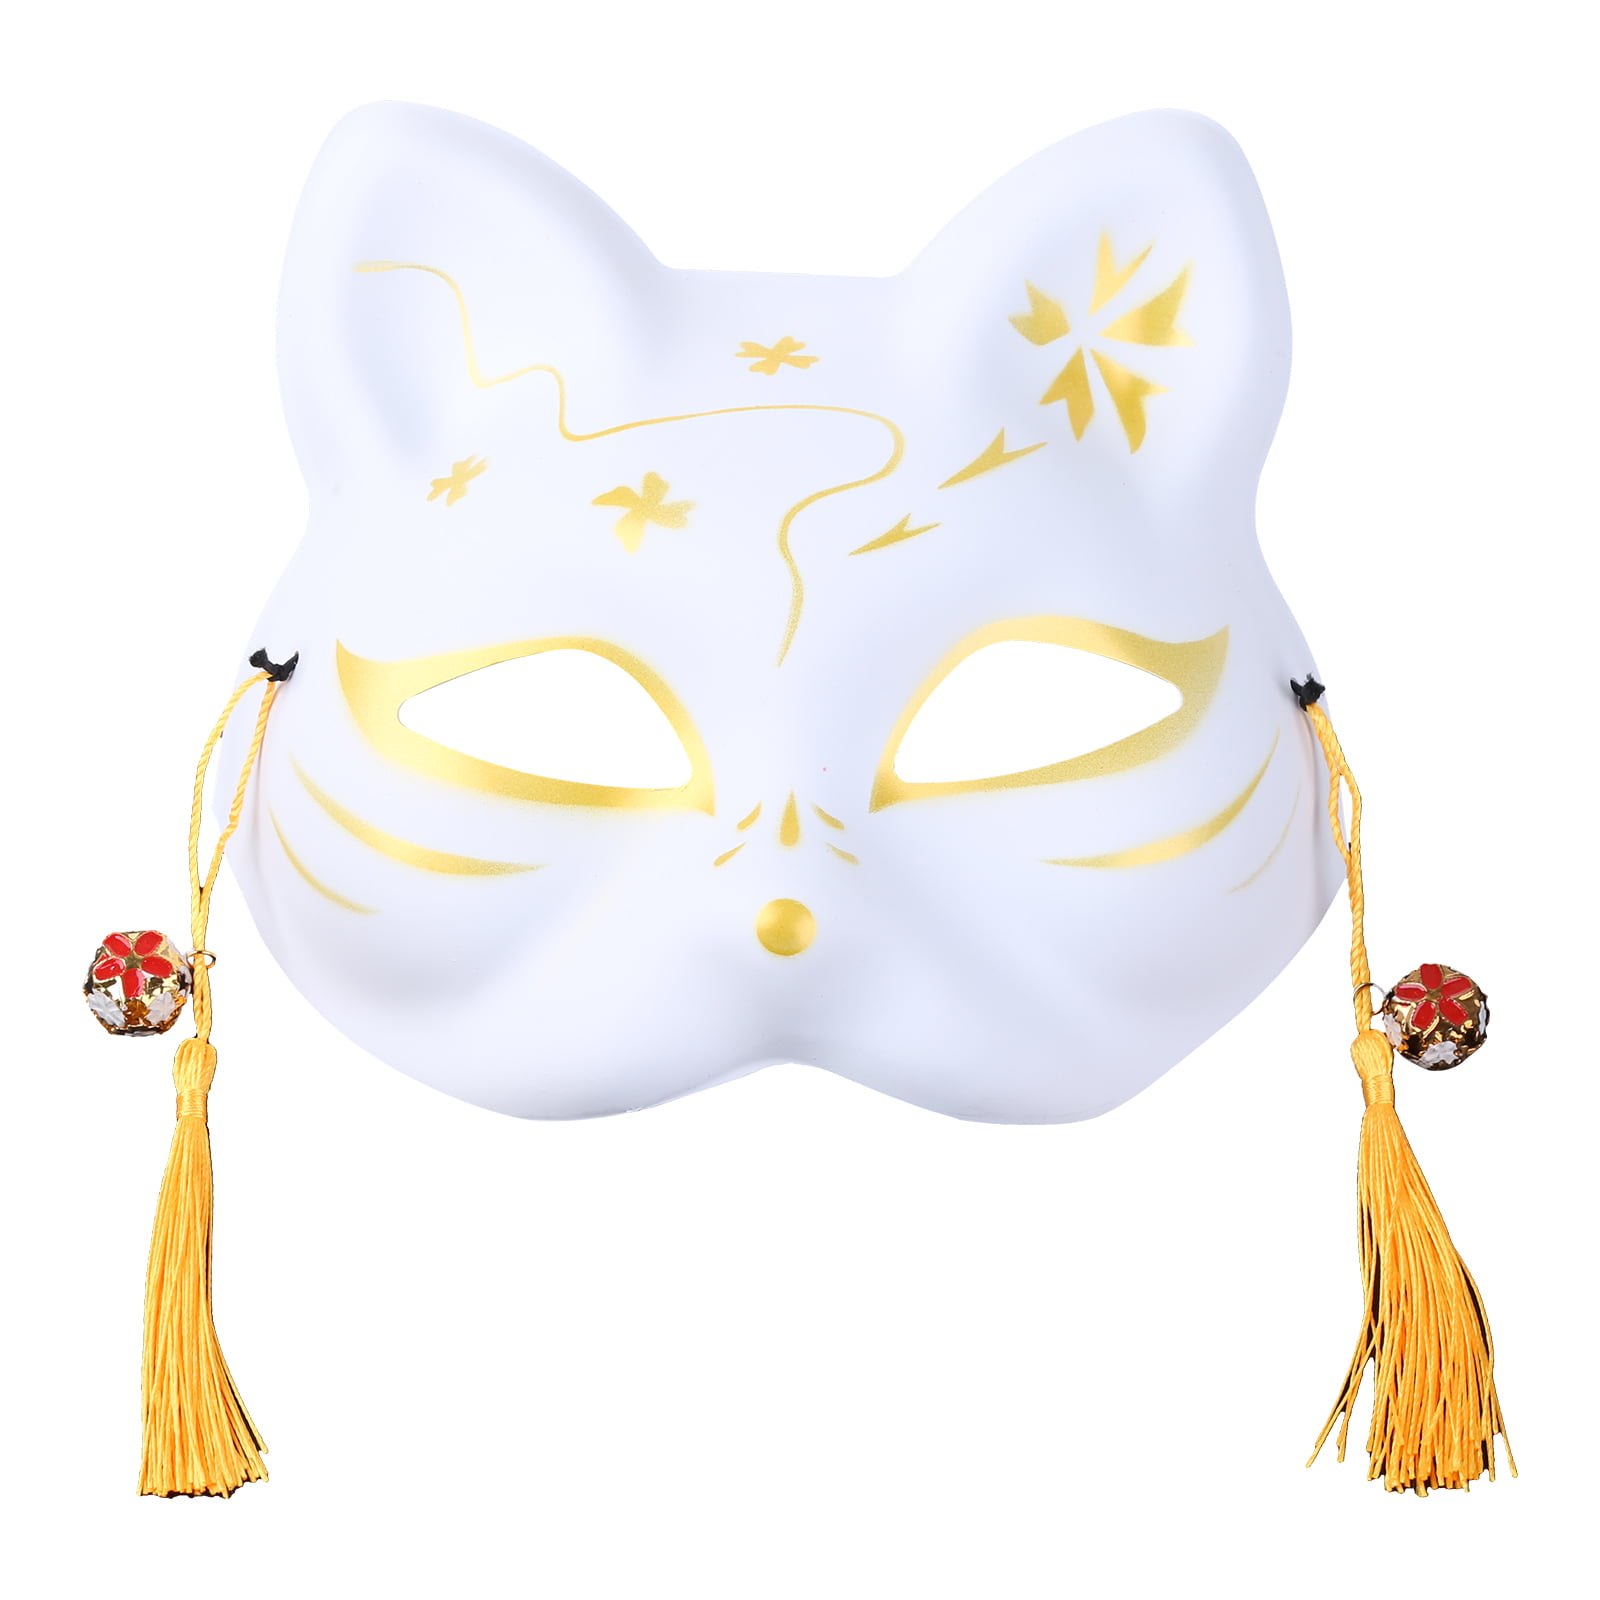 TONKBEEY Japanese Animal Cat Half Face Mask with Tassels Small Bells  Hand-Painted Cosplay Anime Masquerade Party Dress Up 